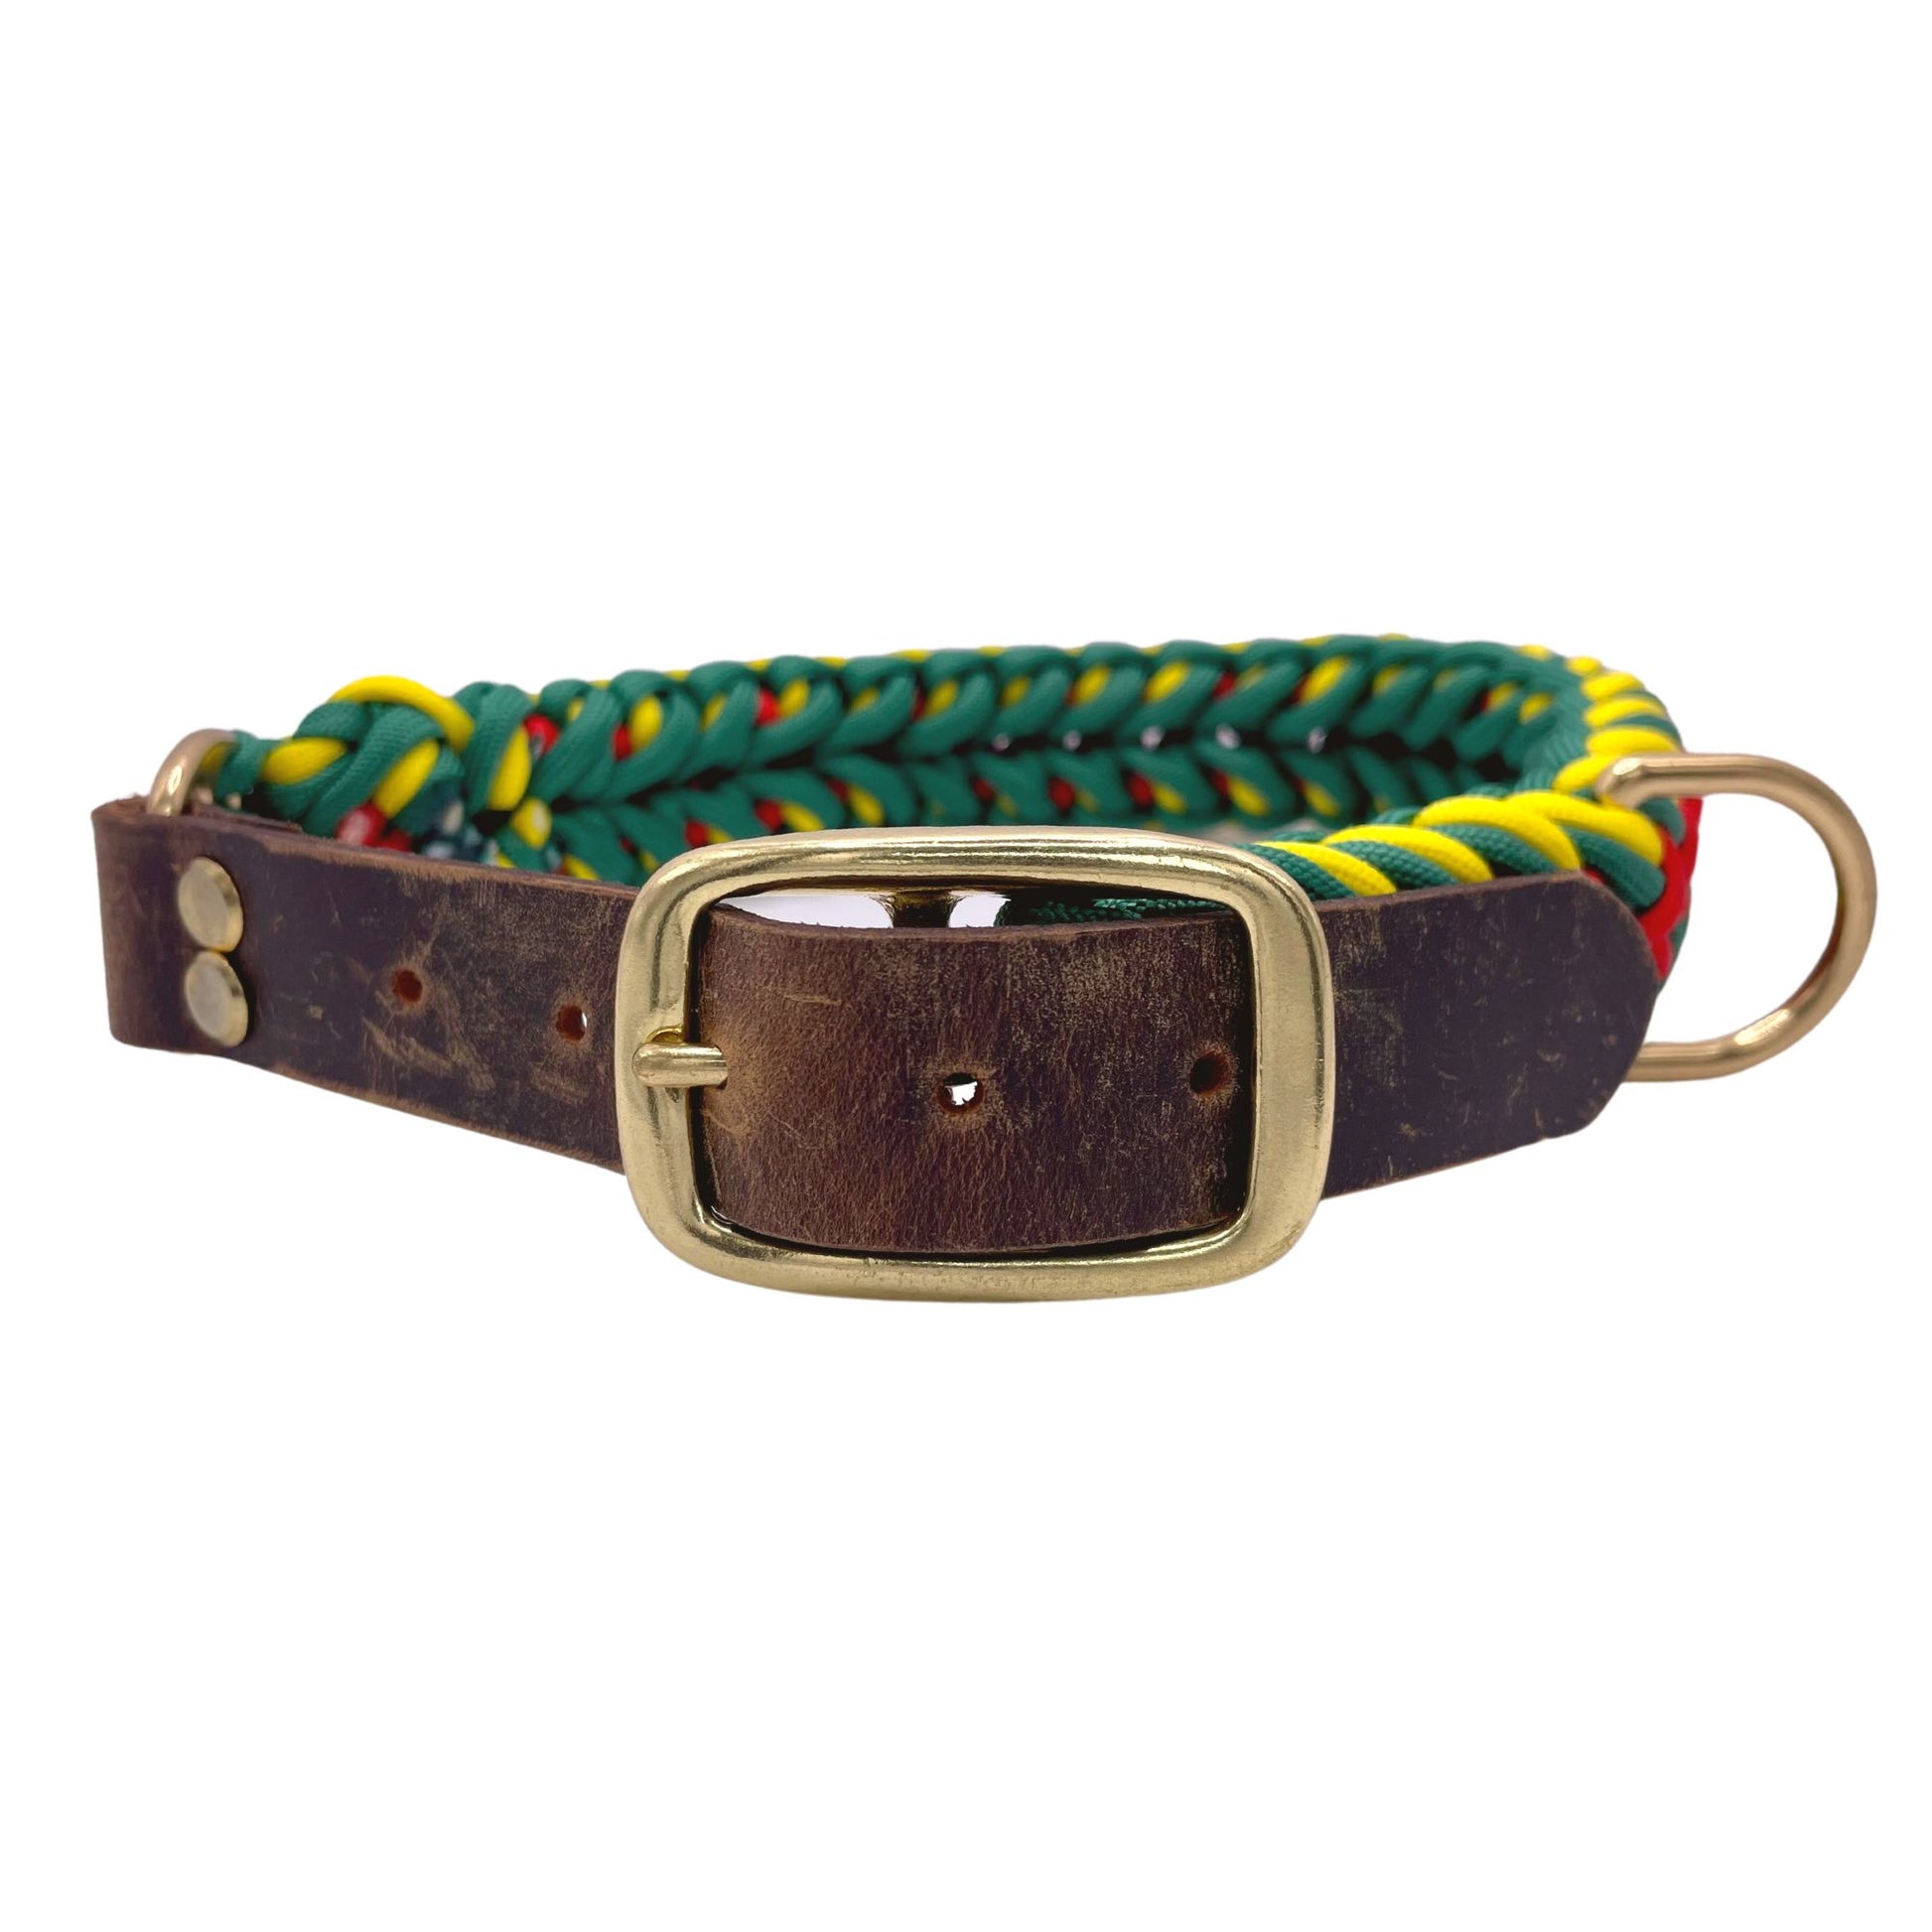 Rasta Paracord Dog Collar with Gold hardware and Leather or Biothane belt options.